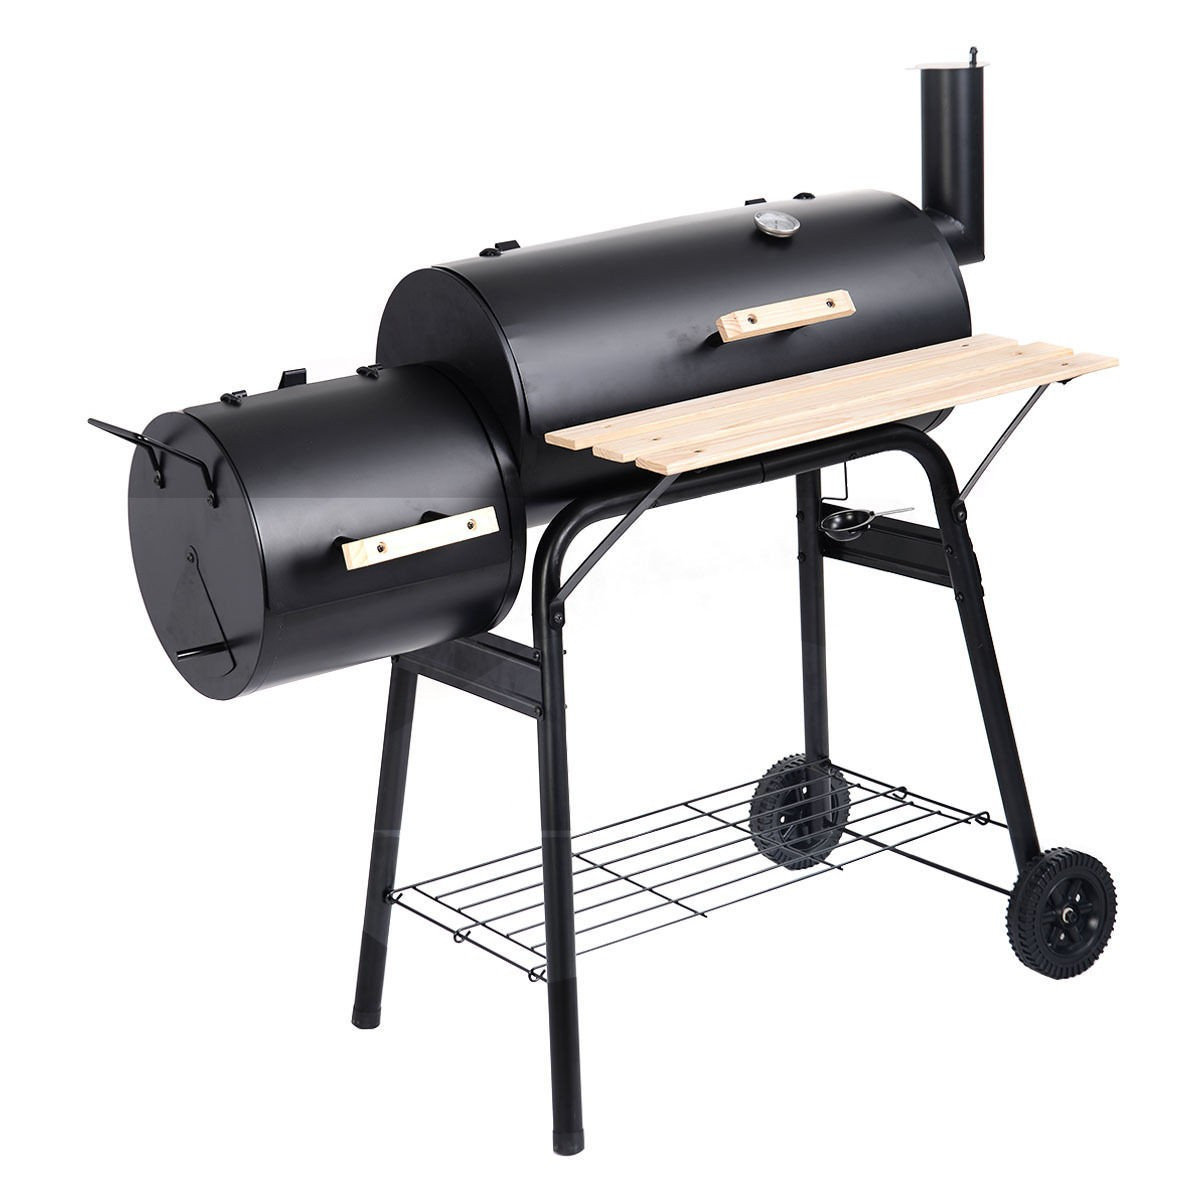 Backyard Barbecue Grill
 Outdoor BBQ Grill Charcoal Barbecue Pit Patio Backyard